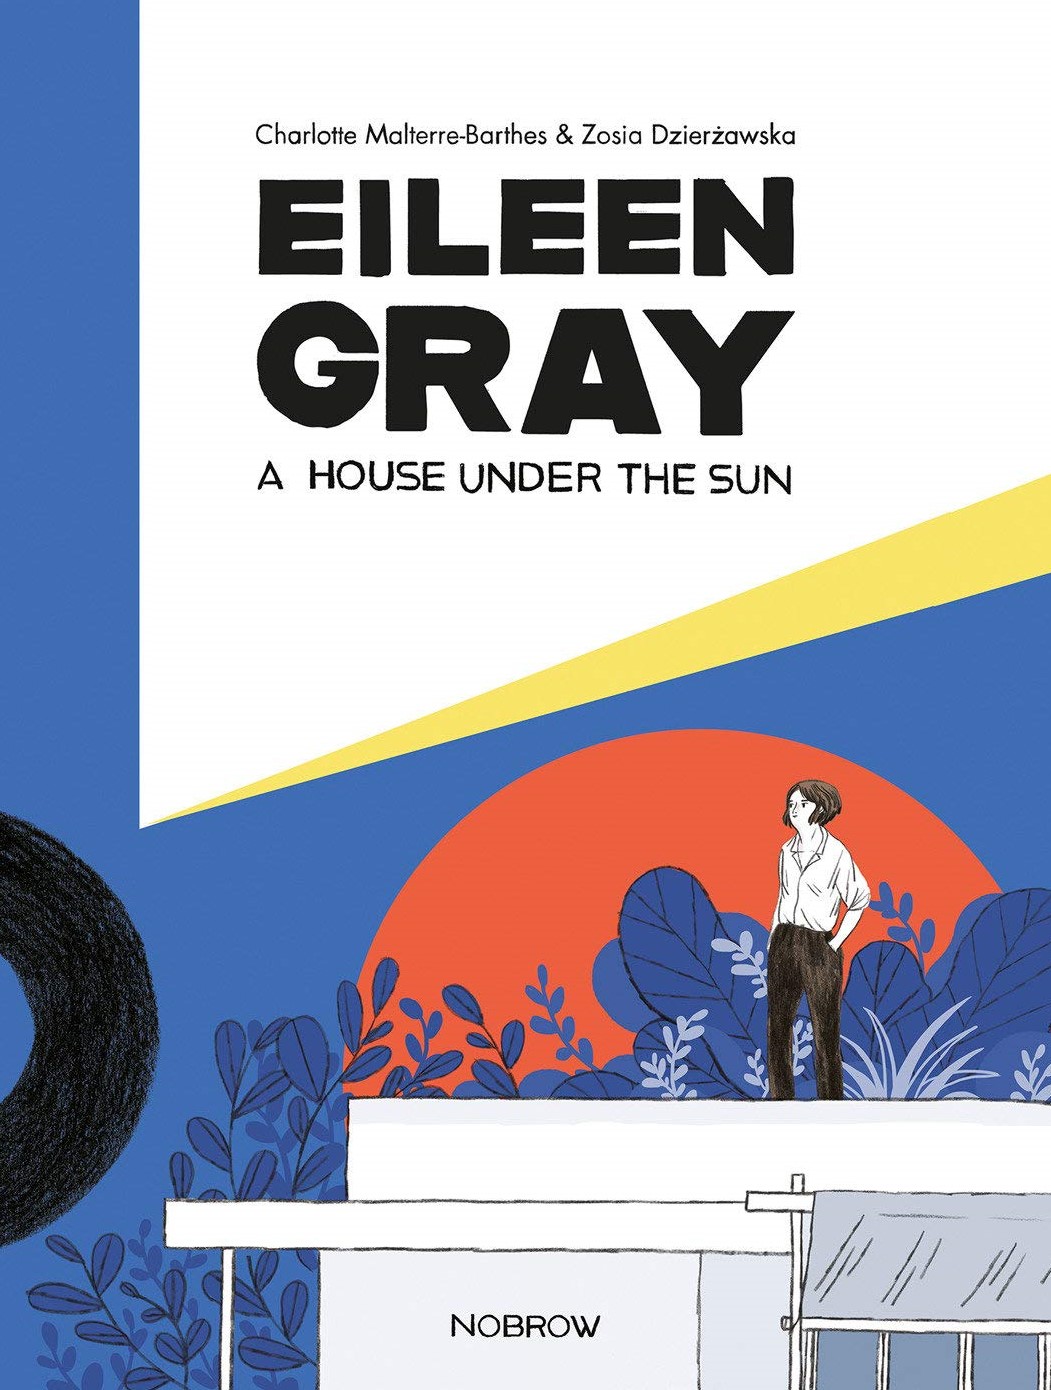 'Eileen Gray: A House Under The Sun' by Charlotte Malterre-Barthes